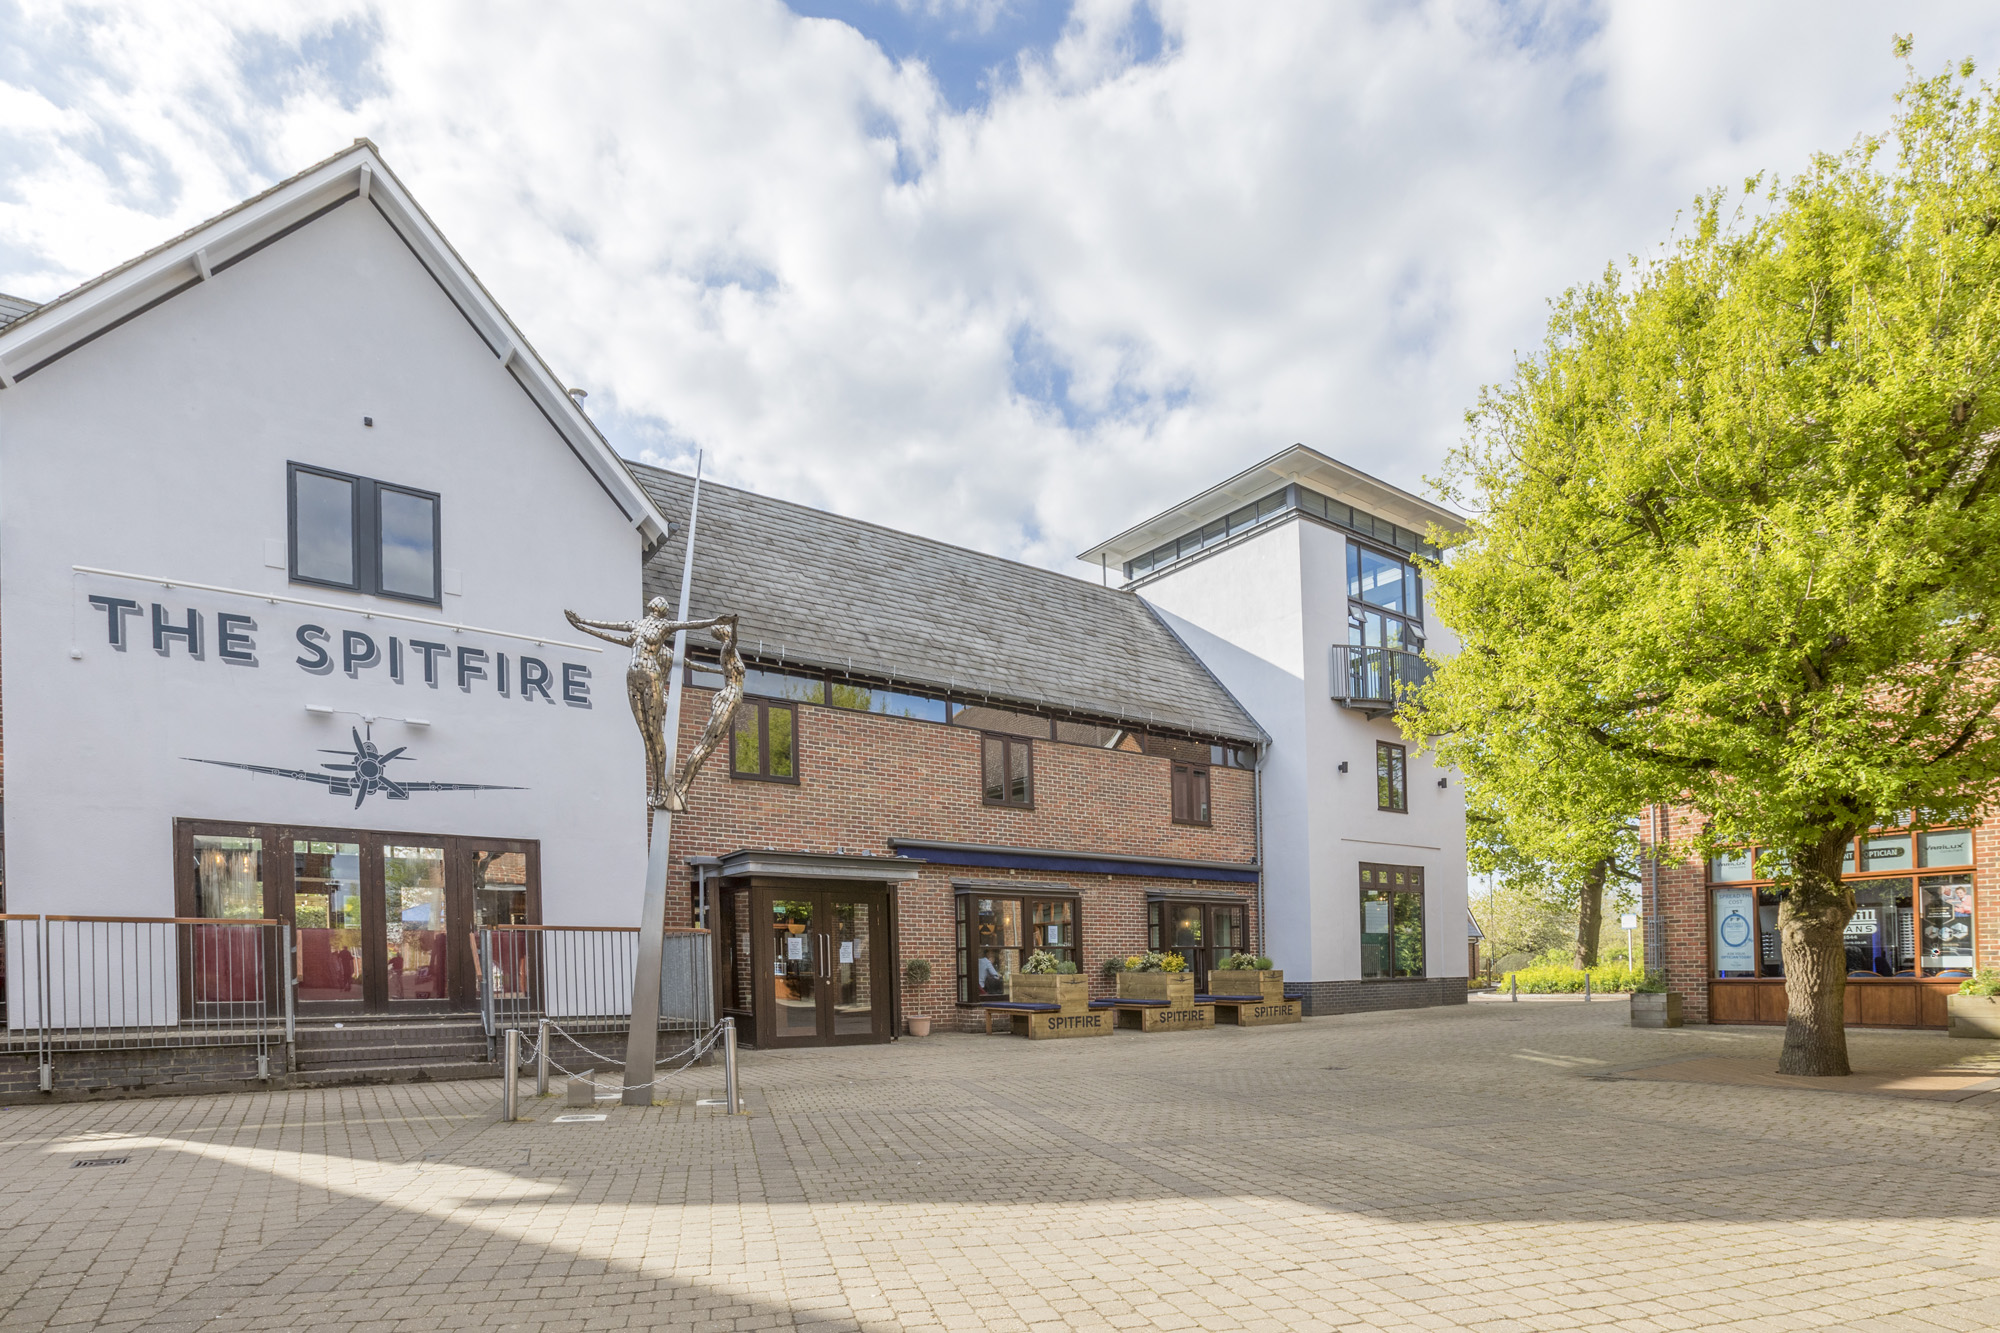 The Spitfire in Kings Hill, West Malling